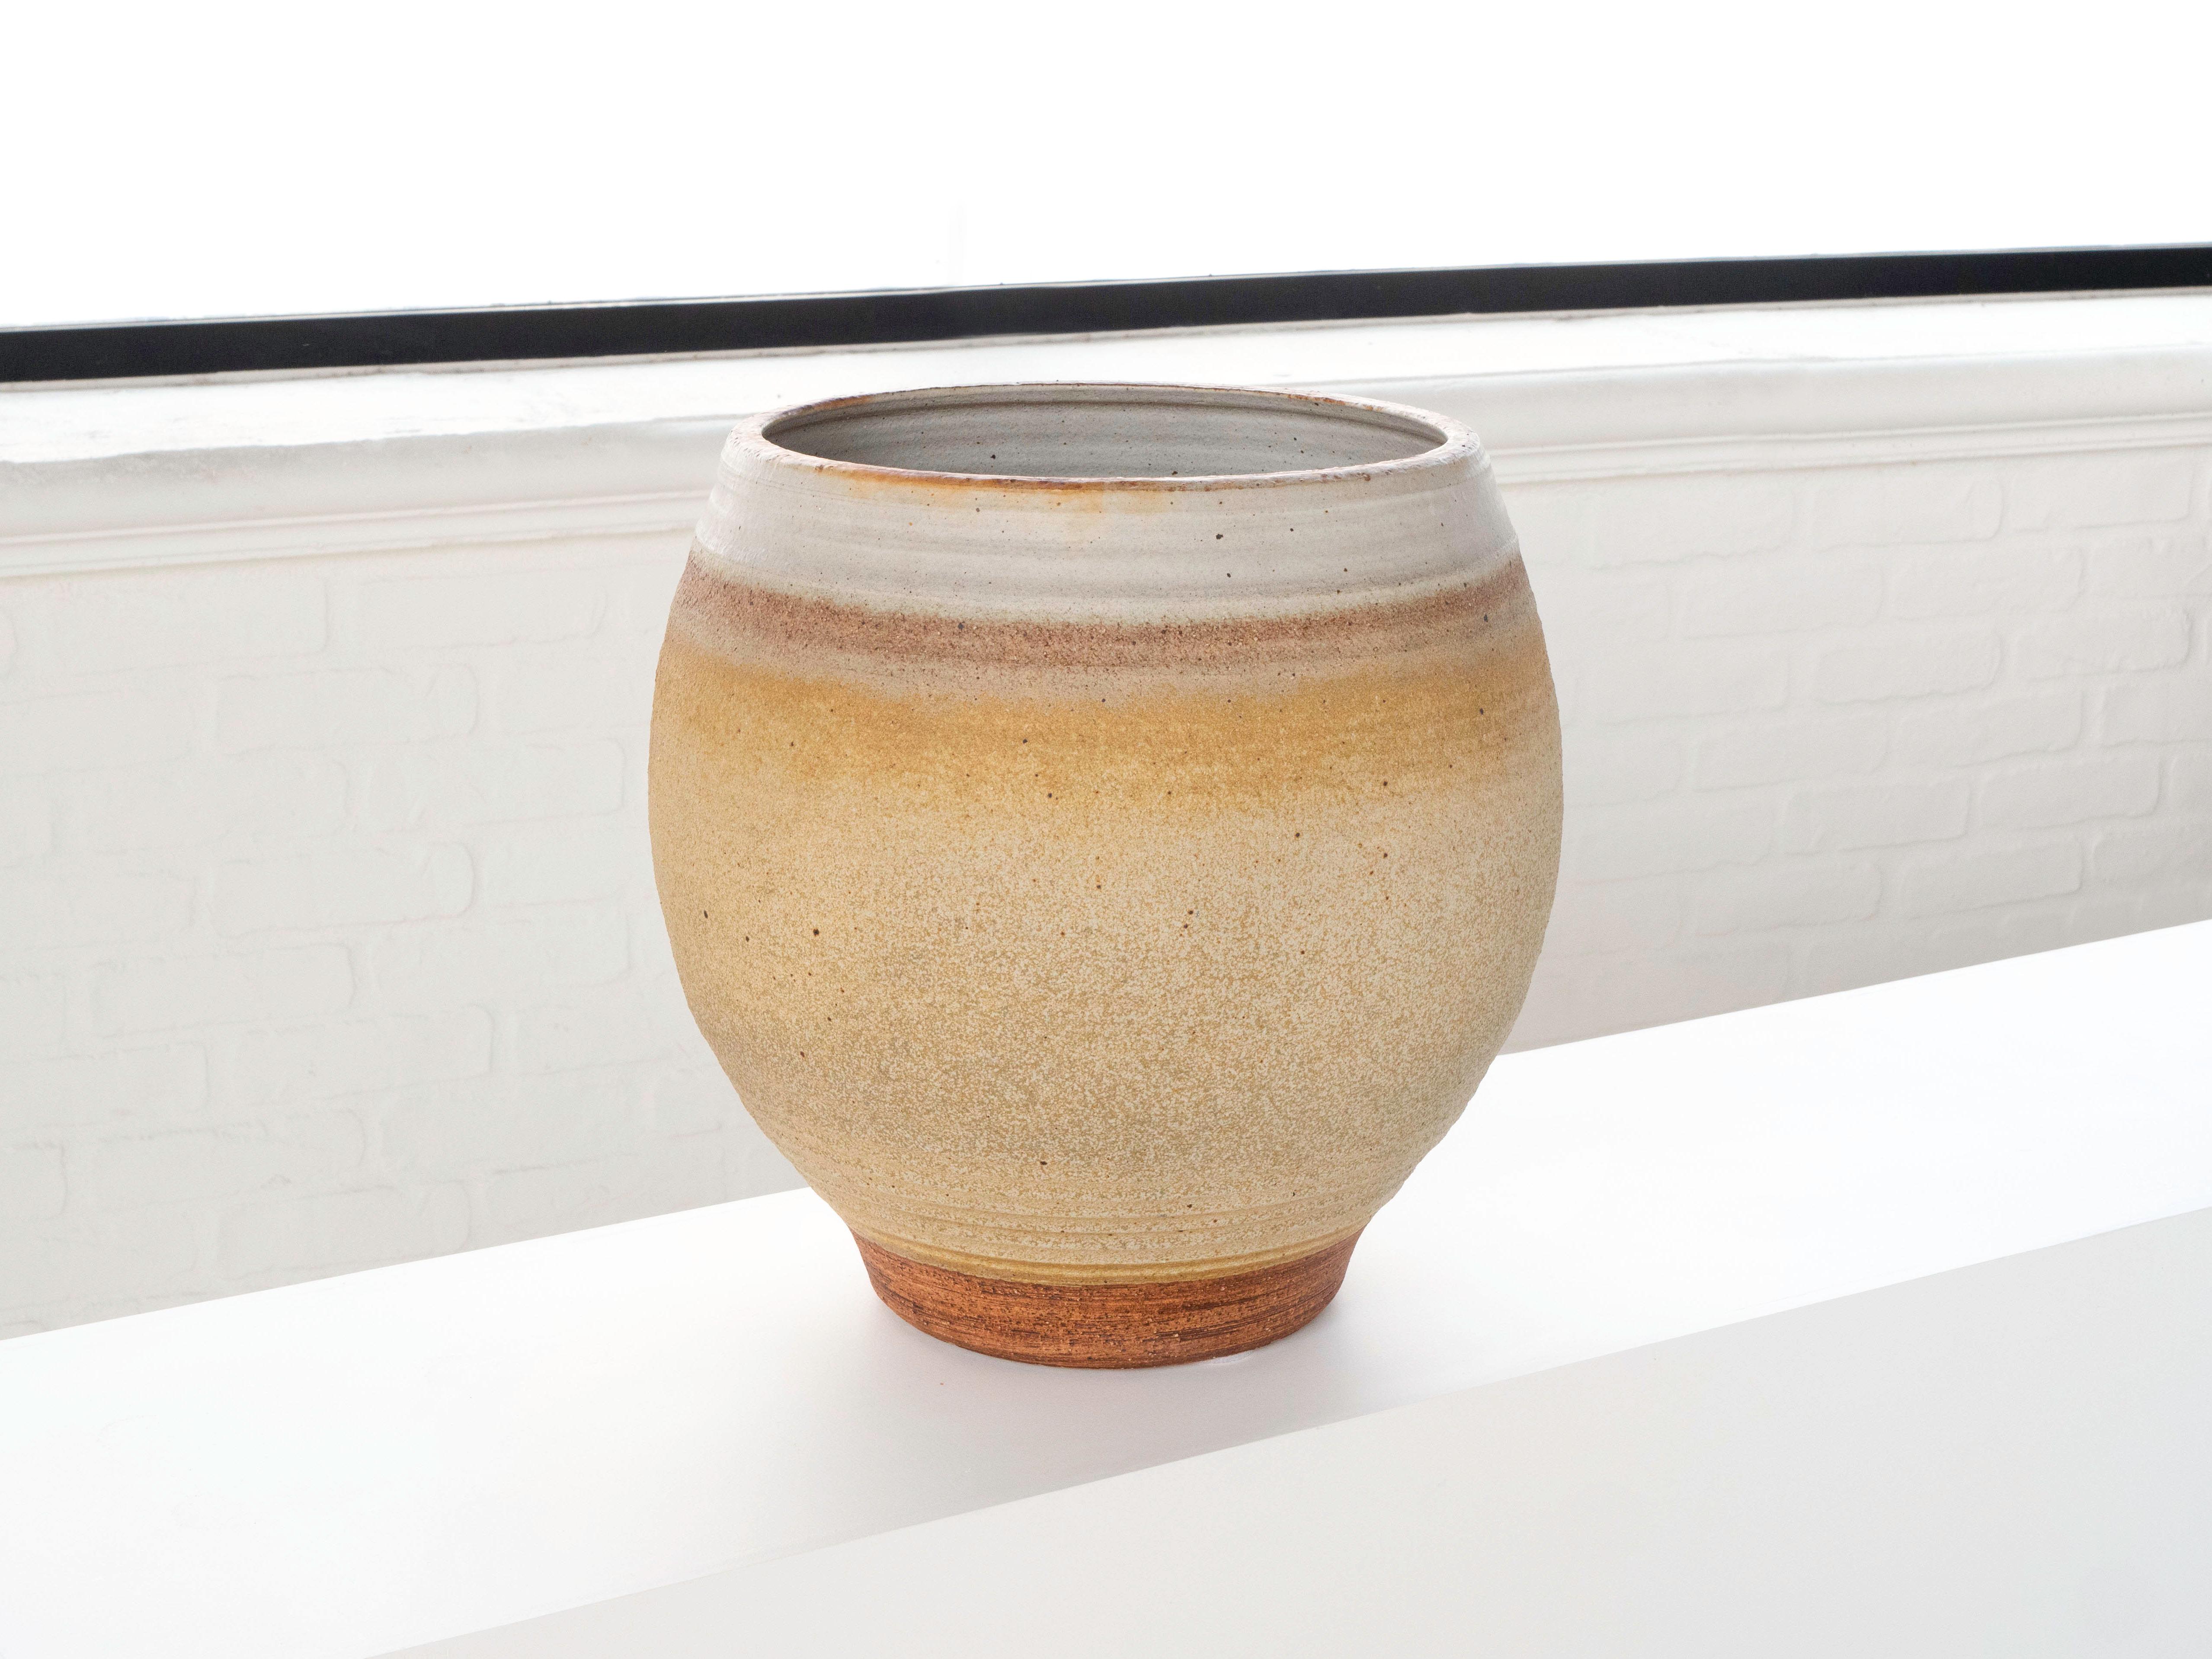 A large hand thrown planter by ceramist Bob Kinzie for his company Affiliated Craftsmen, California 1960's. The upper portion of the piece has a soft yellow tan tone glaze with espresso colored specks while the bottom portion shows exposed